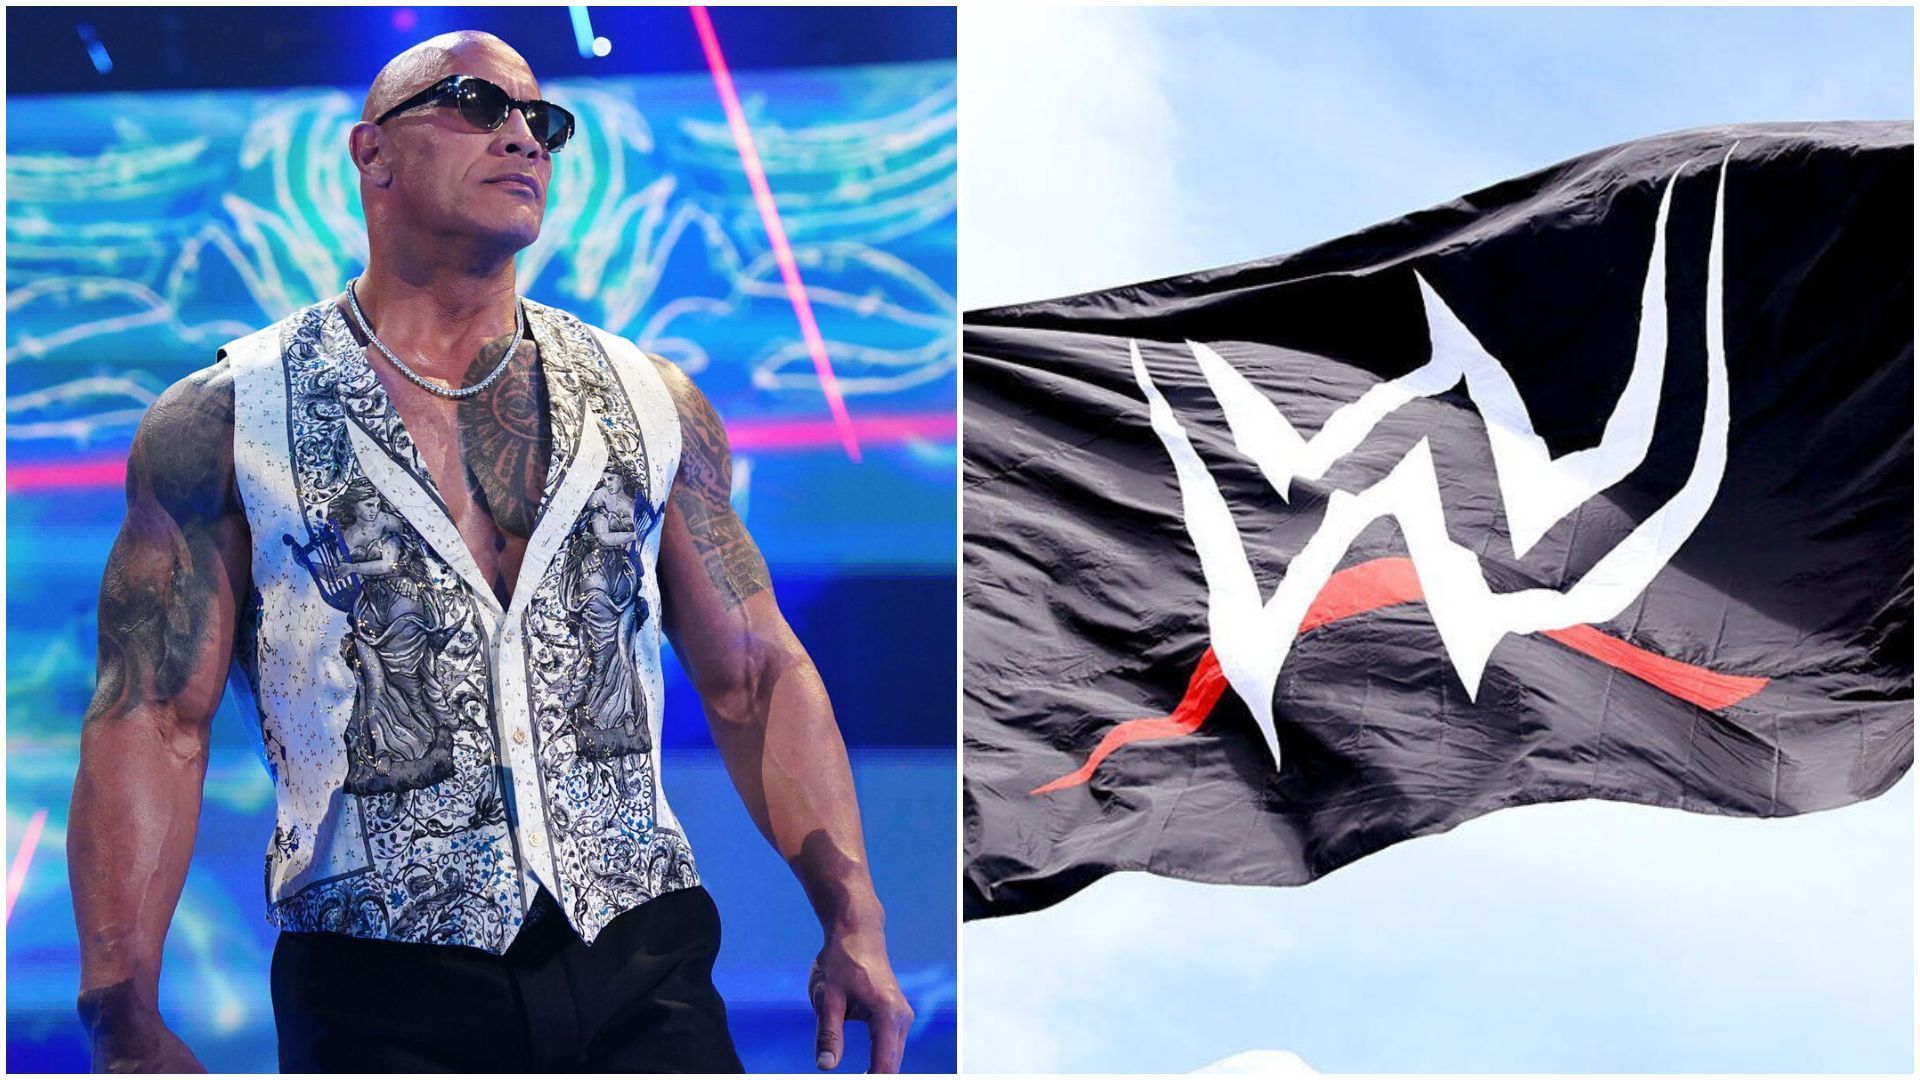 The Rock is a former WWE World Champion. (Image source: WWE.com)